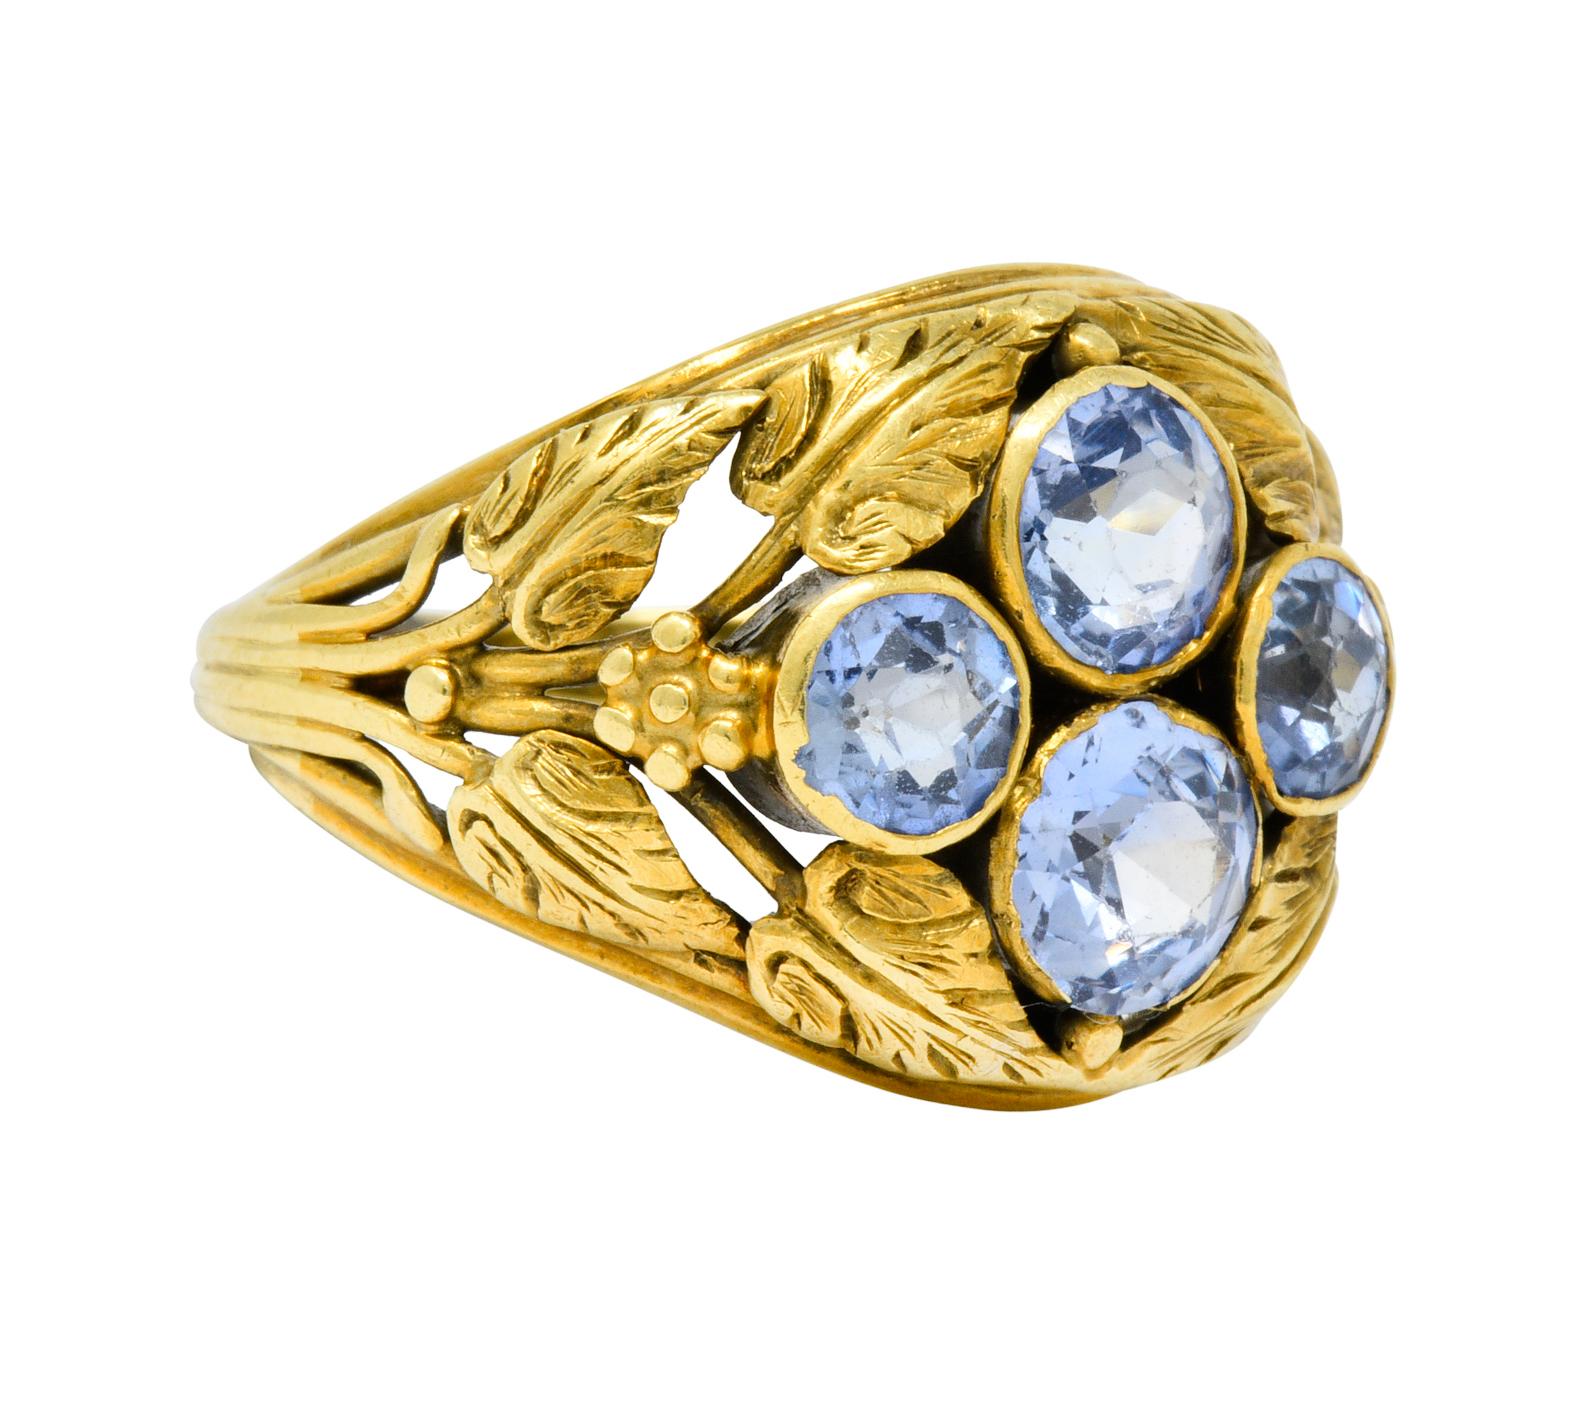 Ring designed as highly rendered leaves with floral shoulder accents

Centering four bezel set sapphire weighing approximately 2.20 carat total; very well-matched medium-light violetish-blue color

Tested as 14 karat gold

Circa: 1905

Size: 4 1/2 &